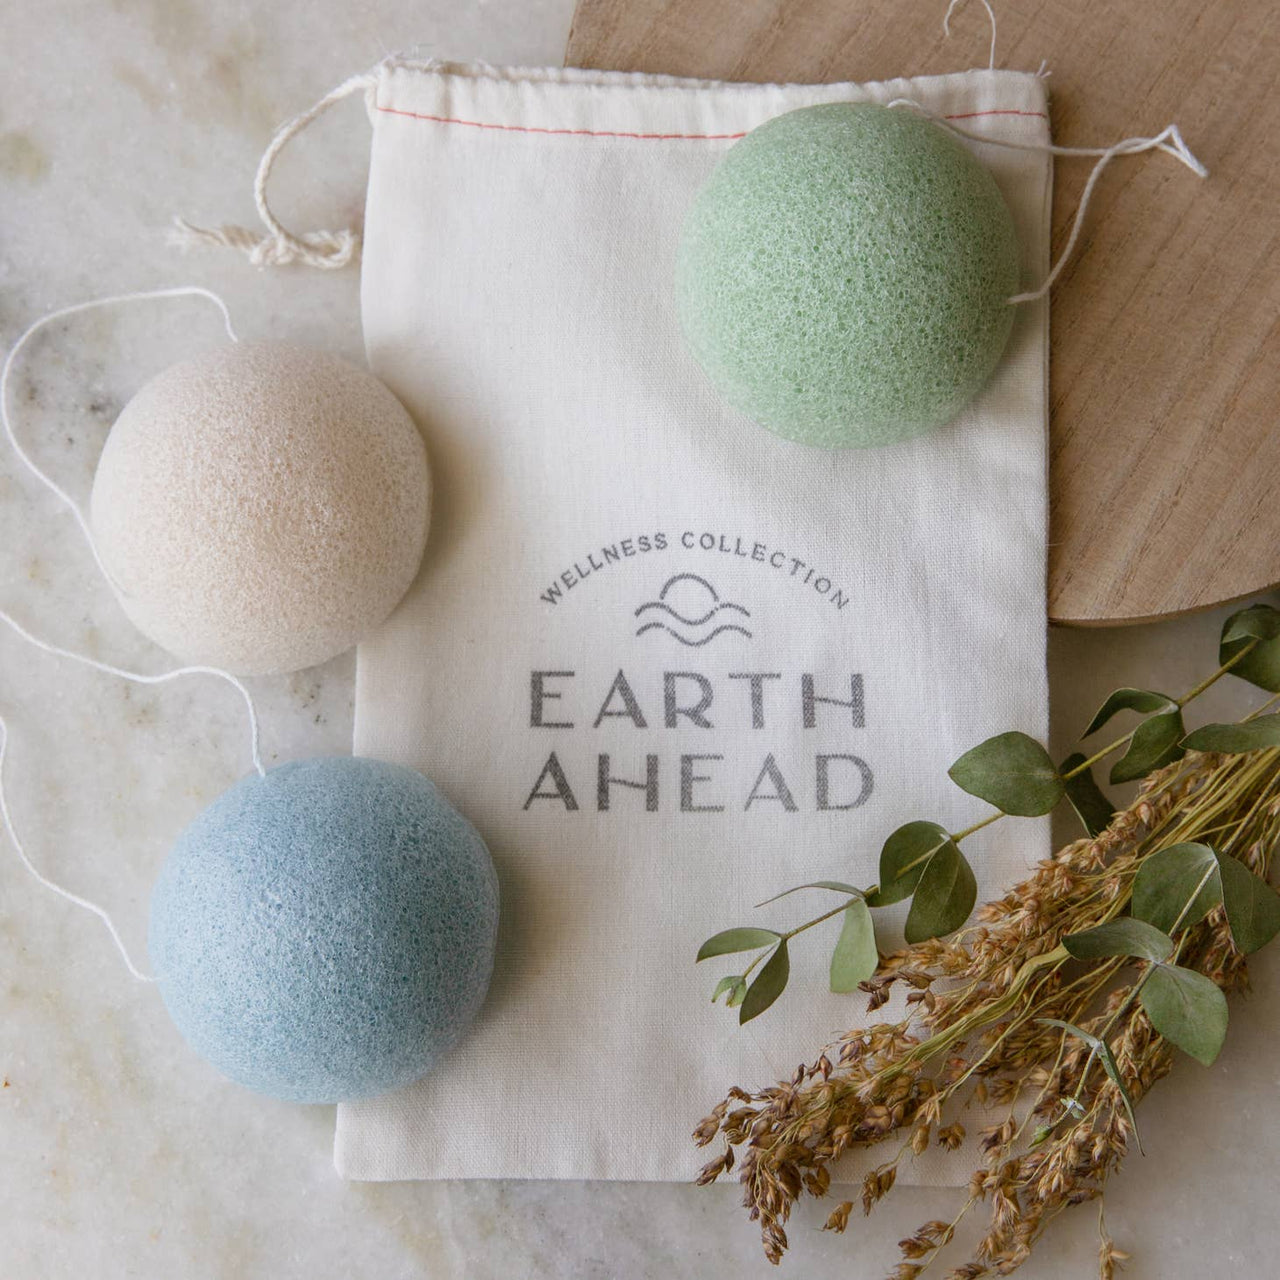 Earth Ahead - Facial Cleansing Sponge - Set of 3 colors w/ pouch